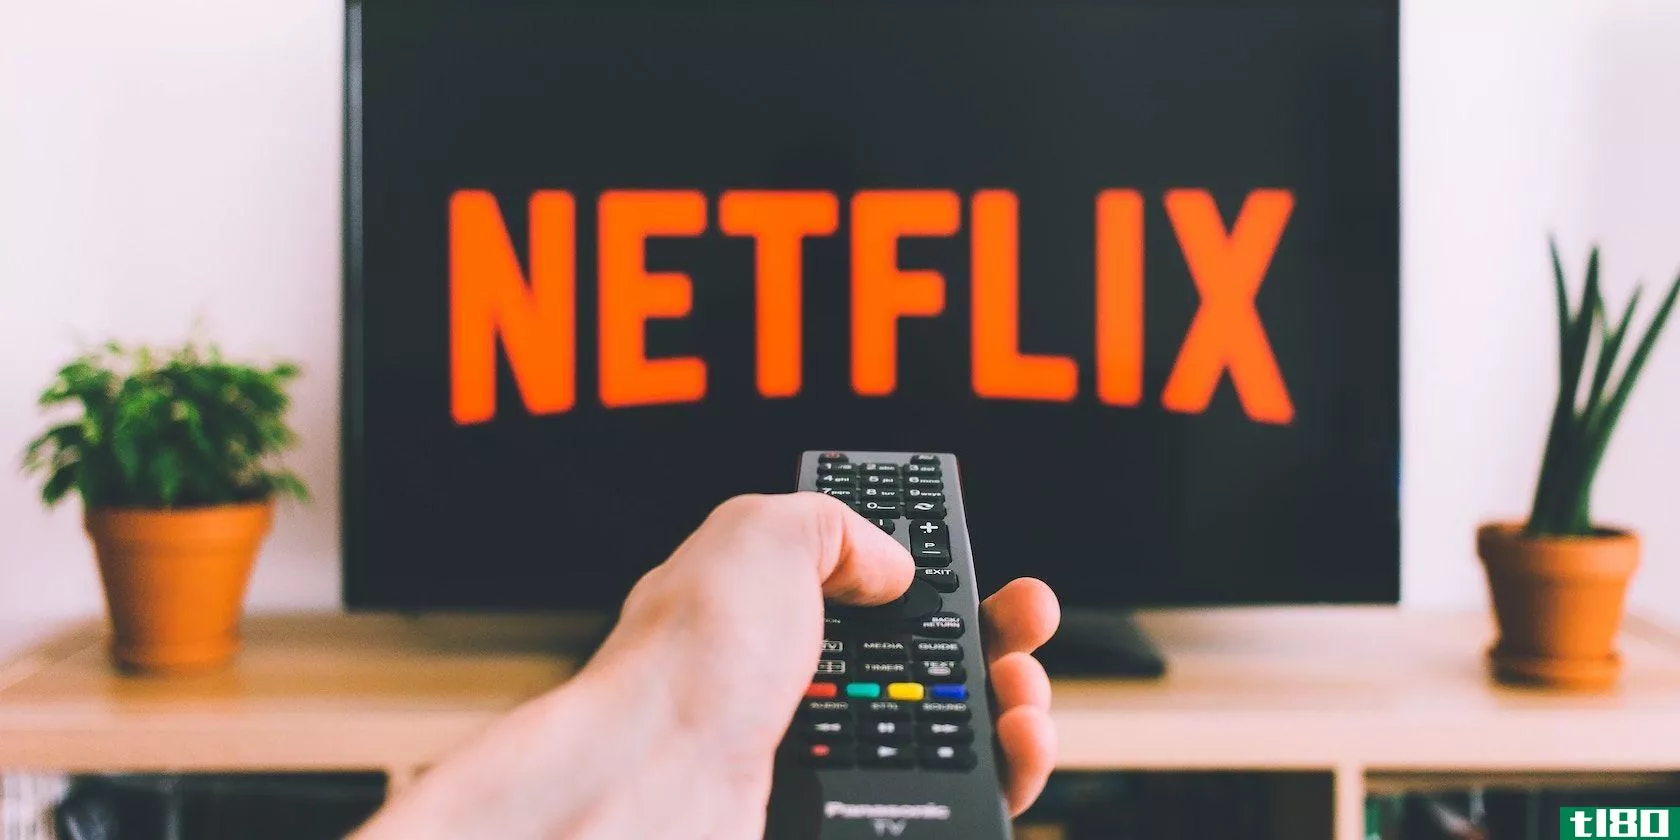 Guy pointing remote at Netflix on TV